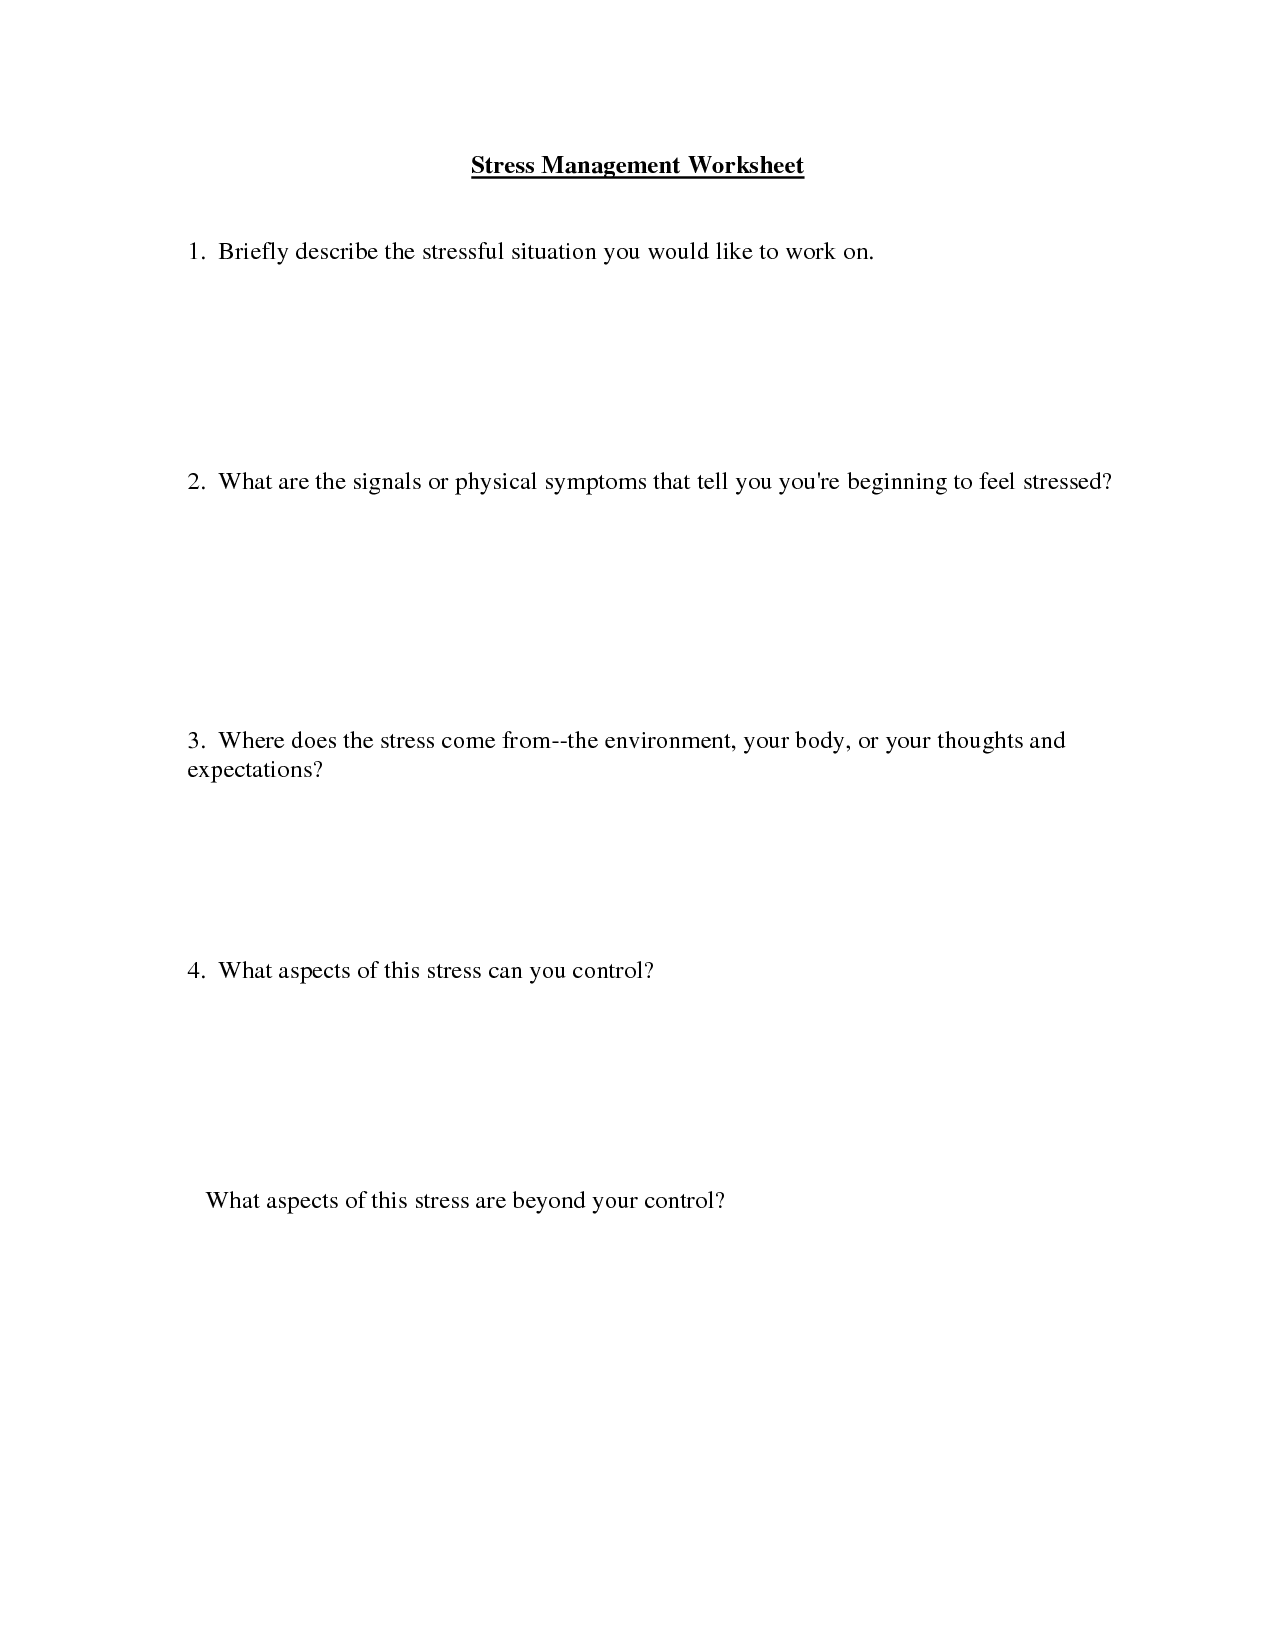 Anxiety and Stress Management Worksheets Image